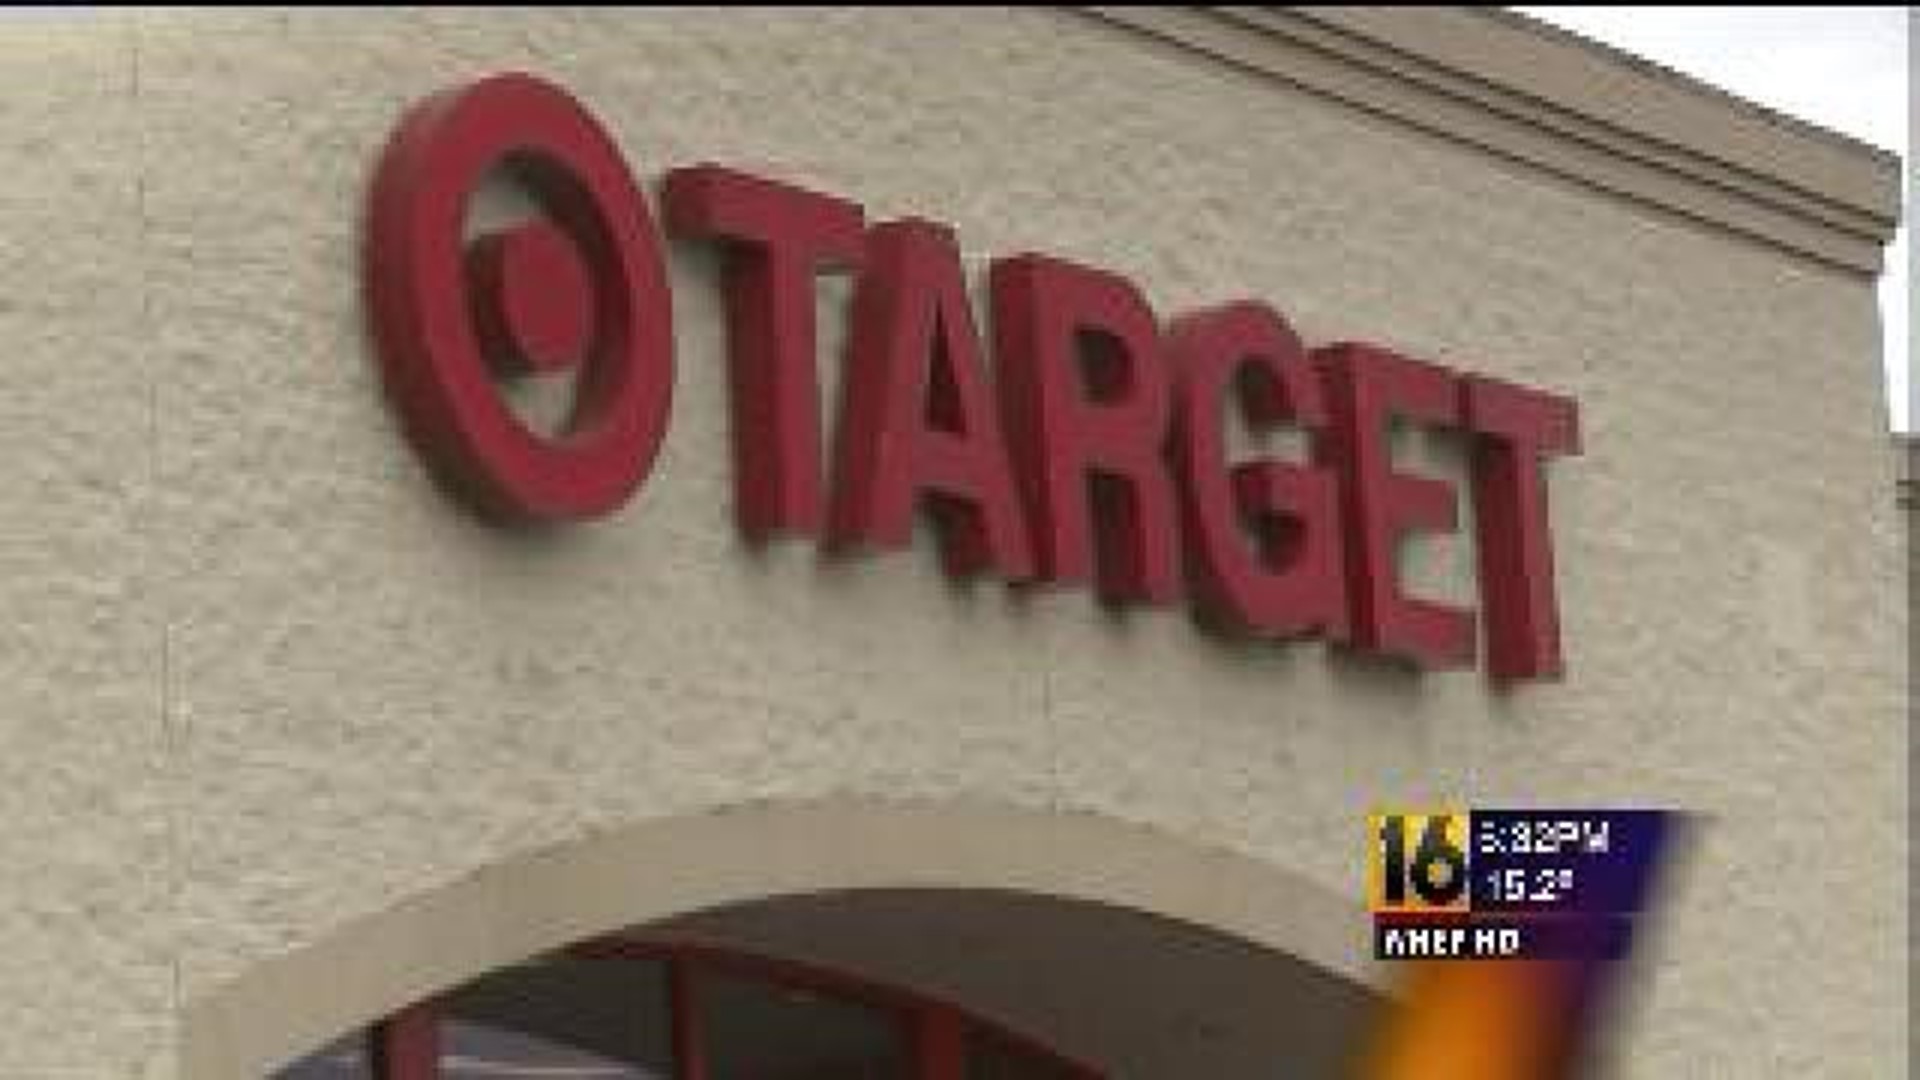 Target Shopper in Luzerne County Falls For Caller ID Scam